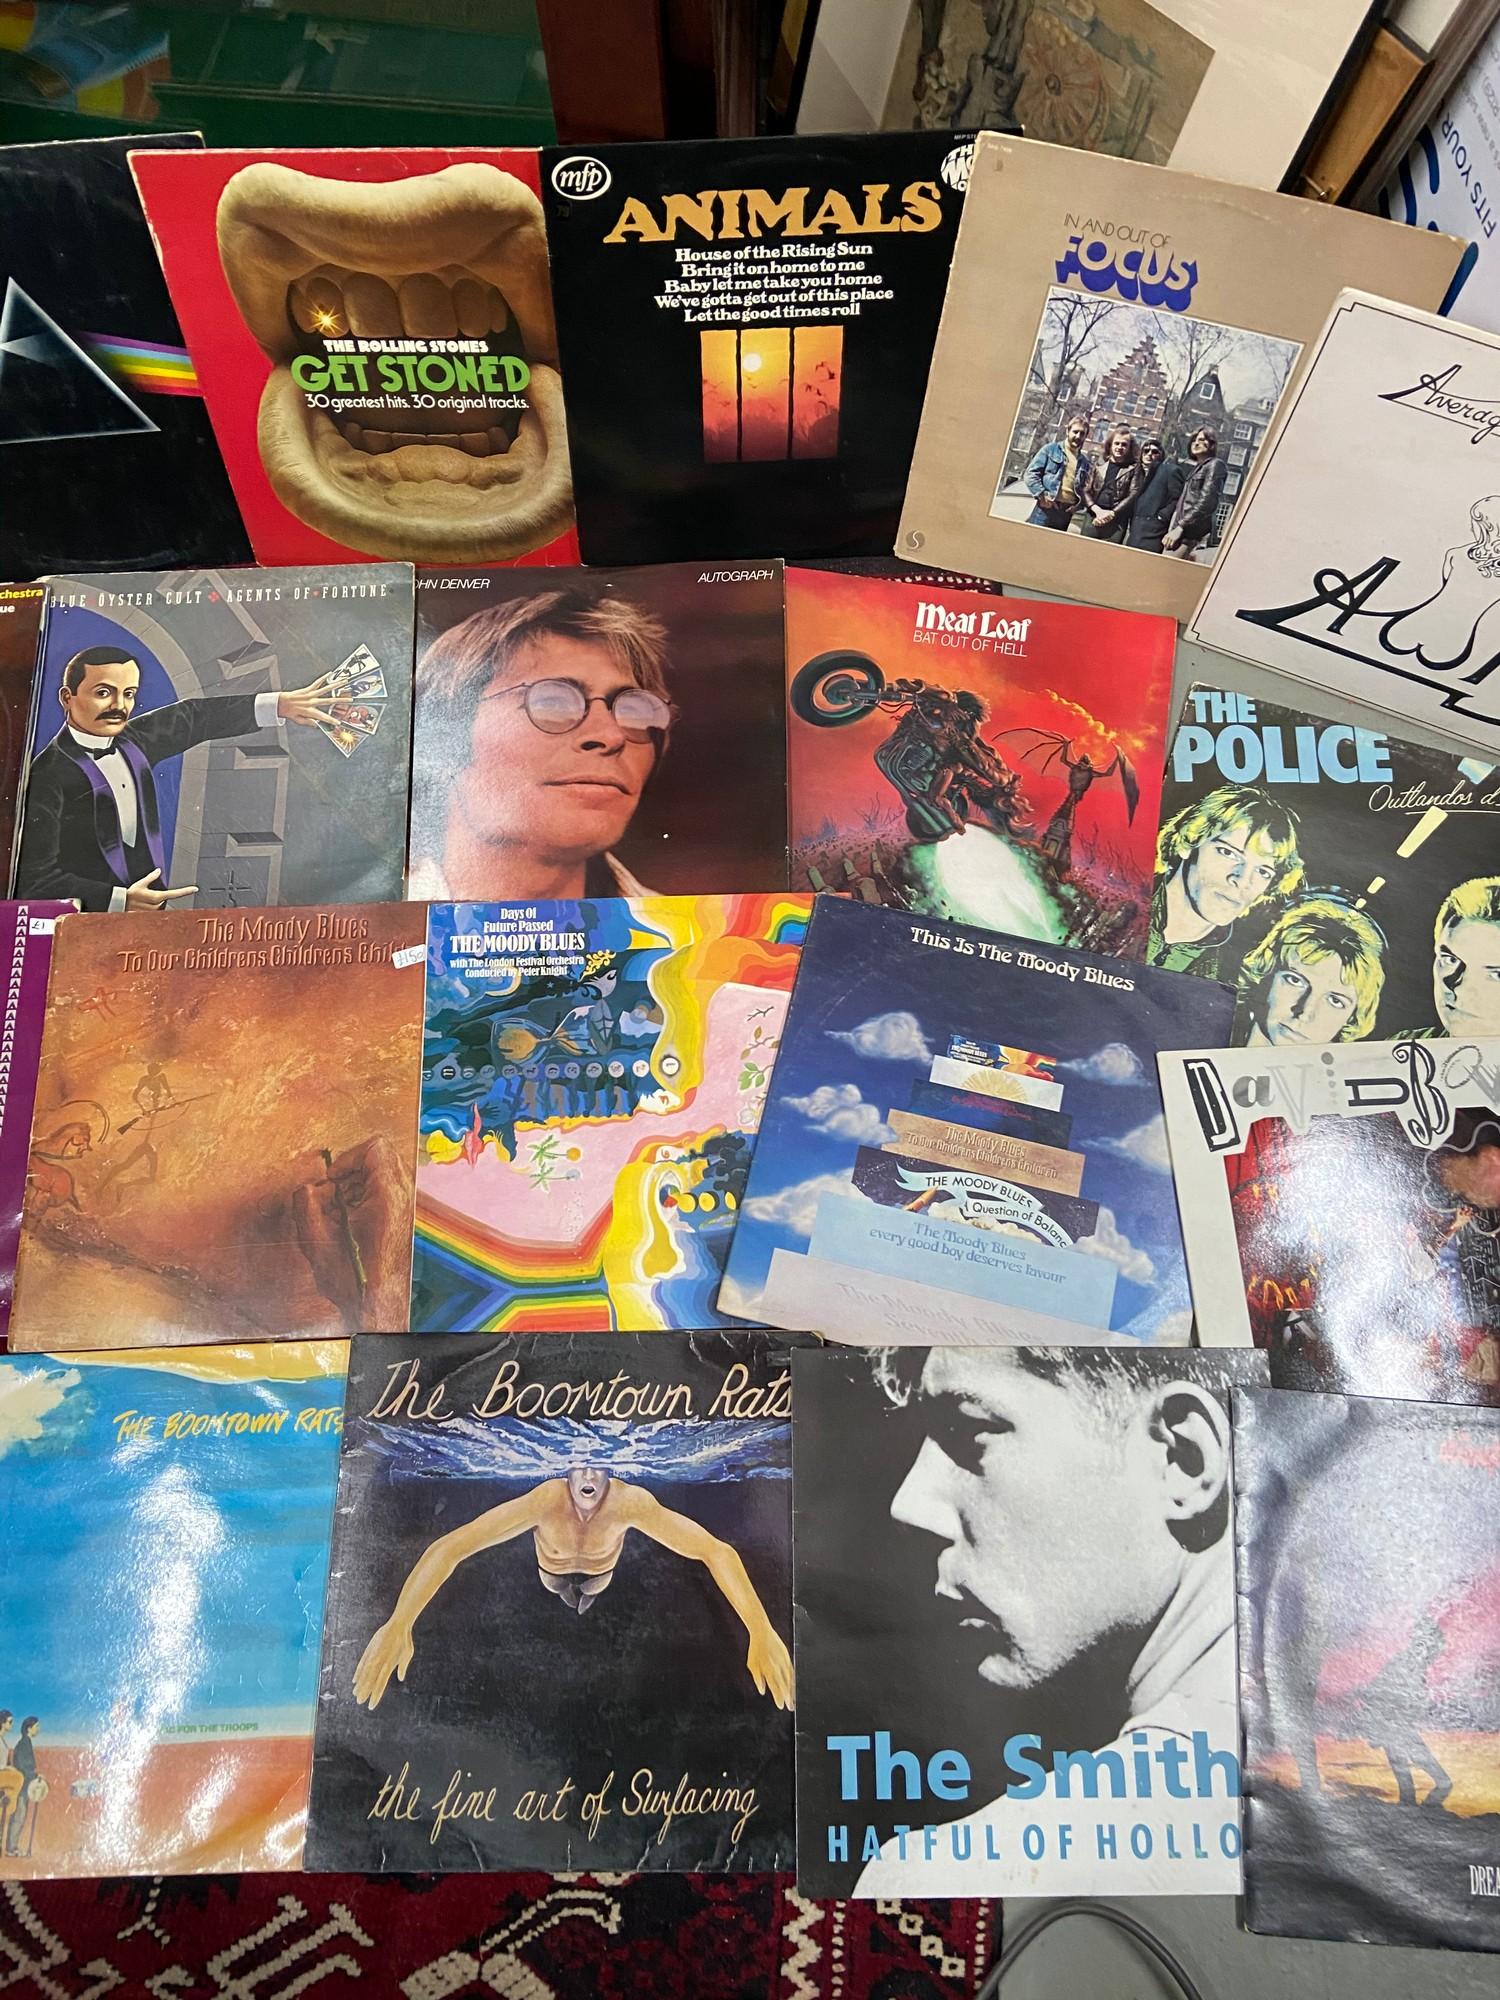 A Collection of LPS, including Pink Floyd, Stones, Barclay James Harvest, Madness, Police, U2, - Image 2 of 5